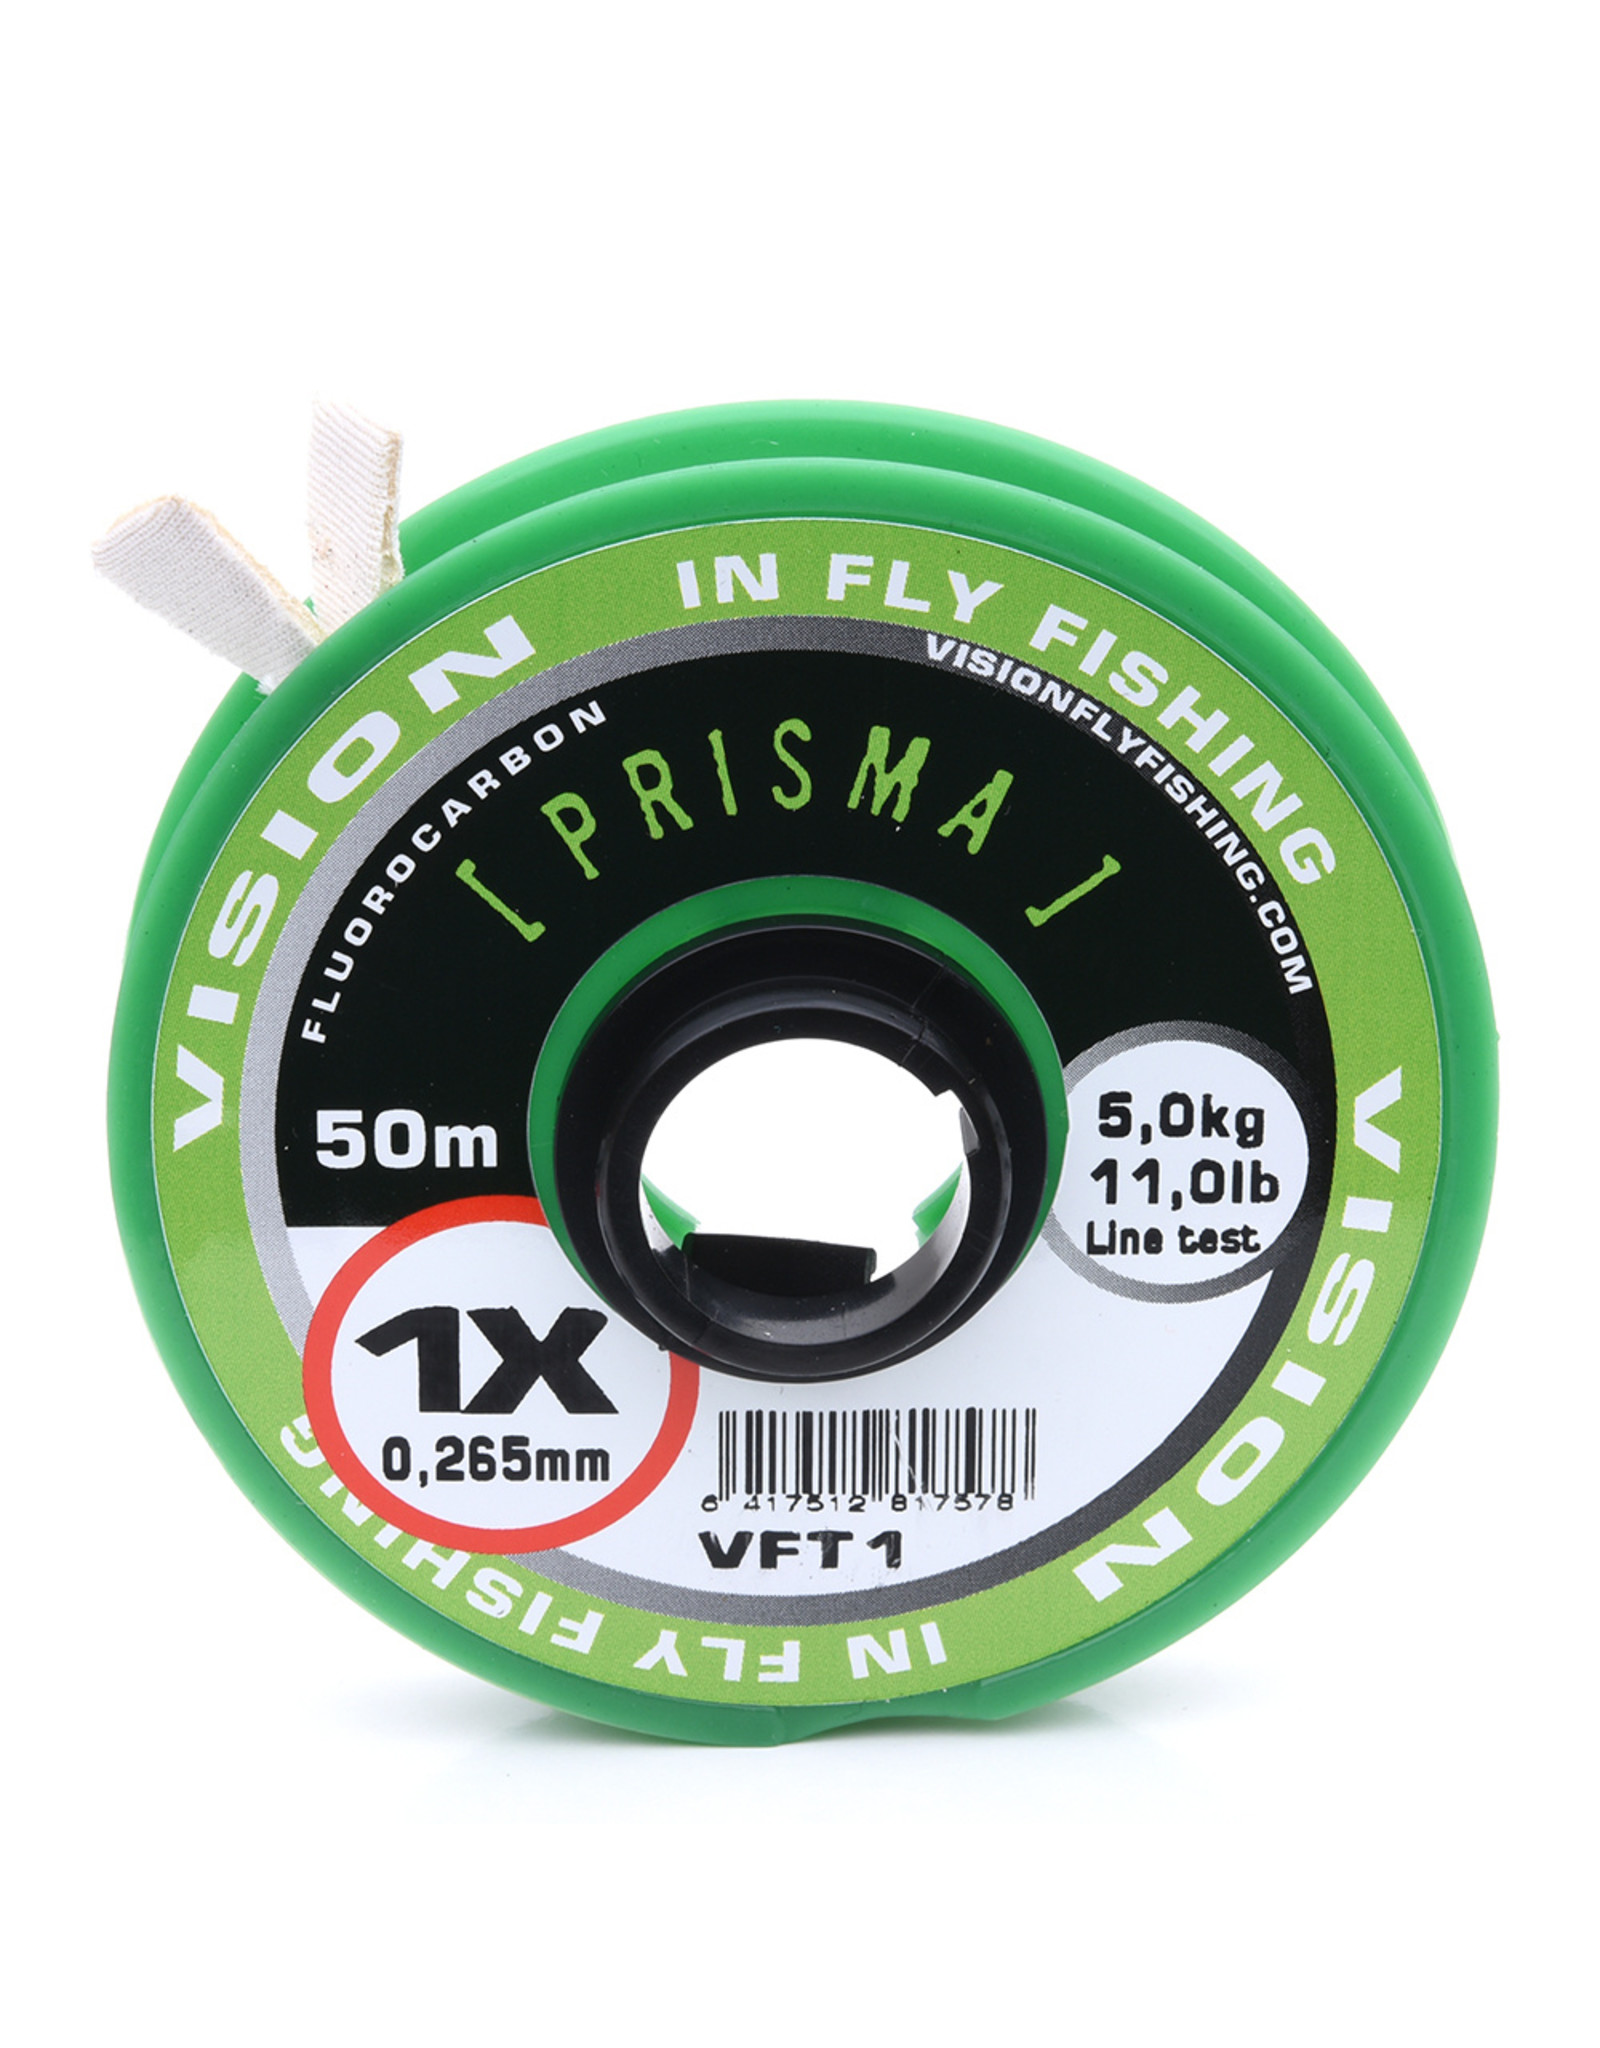 VISION FLY FISHING PRISMA FLUOROCARBON TIPPET